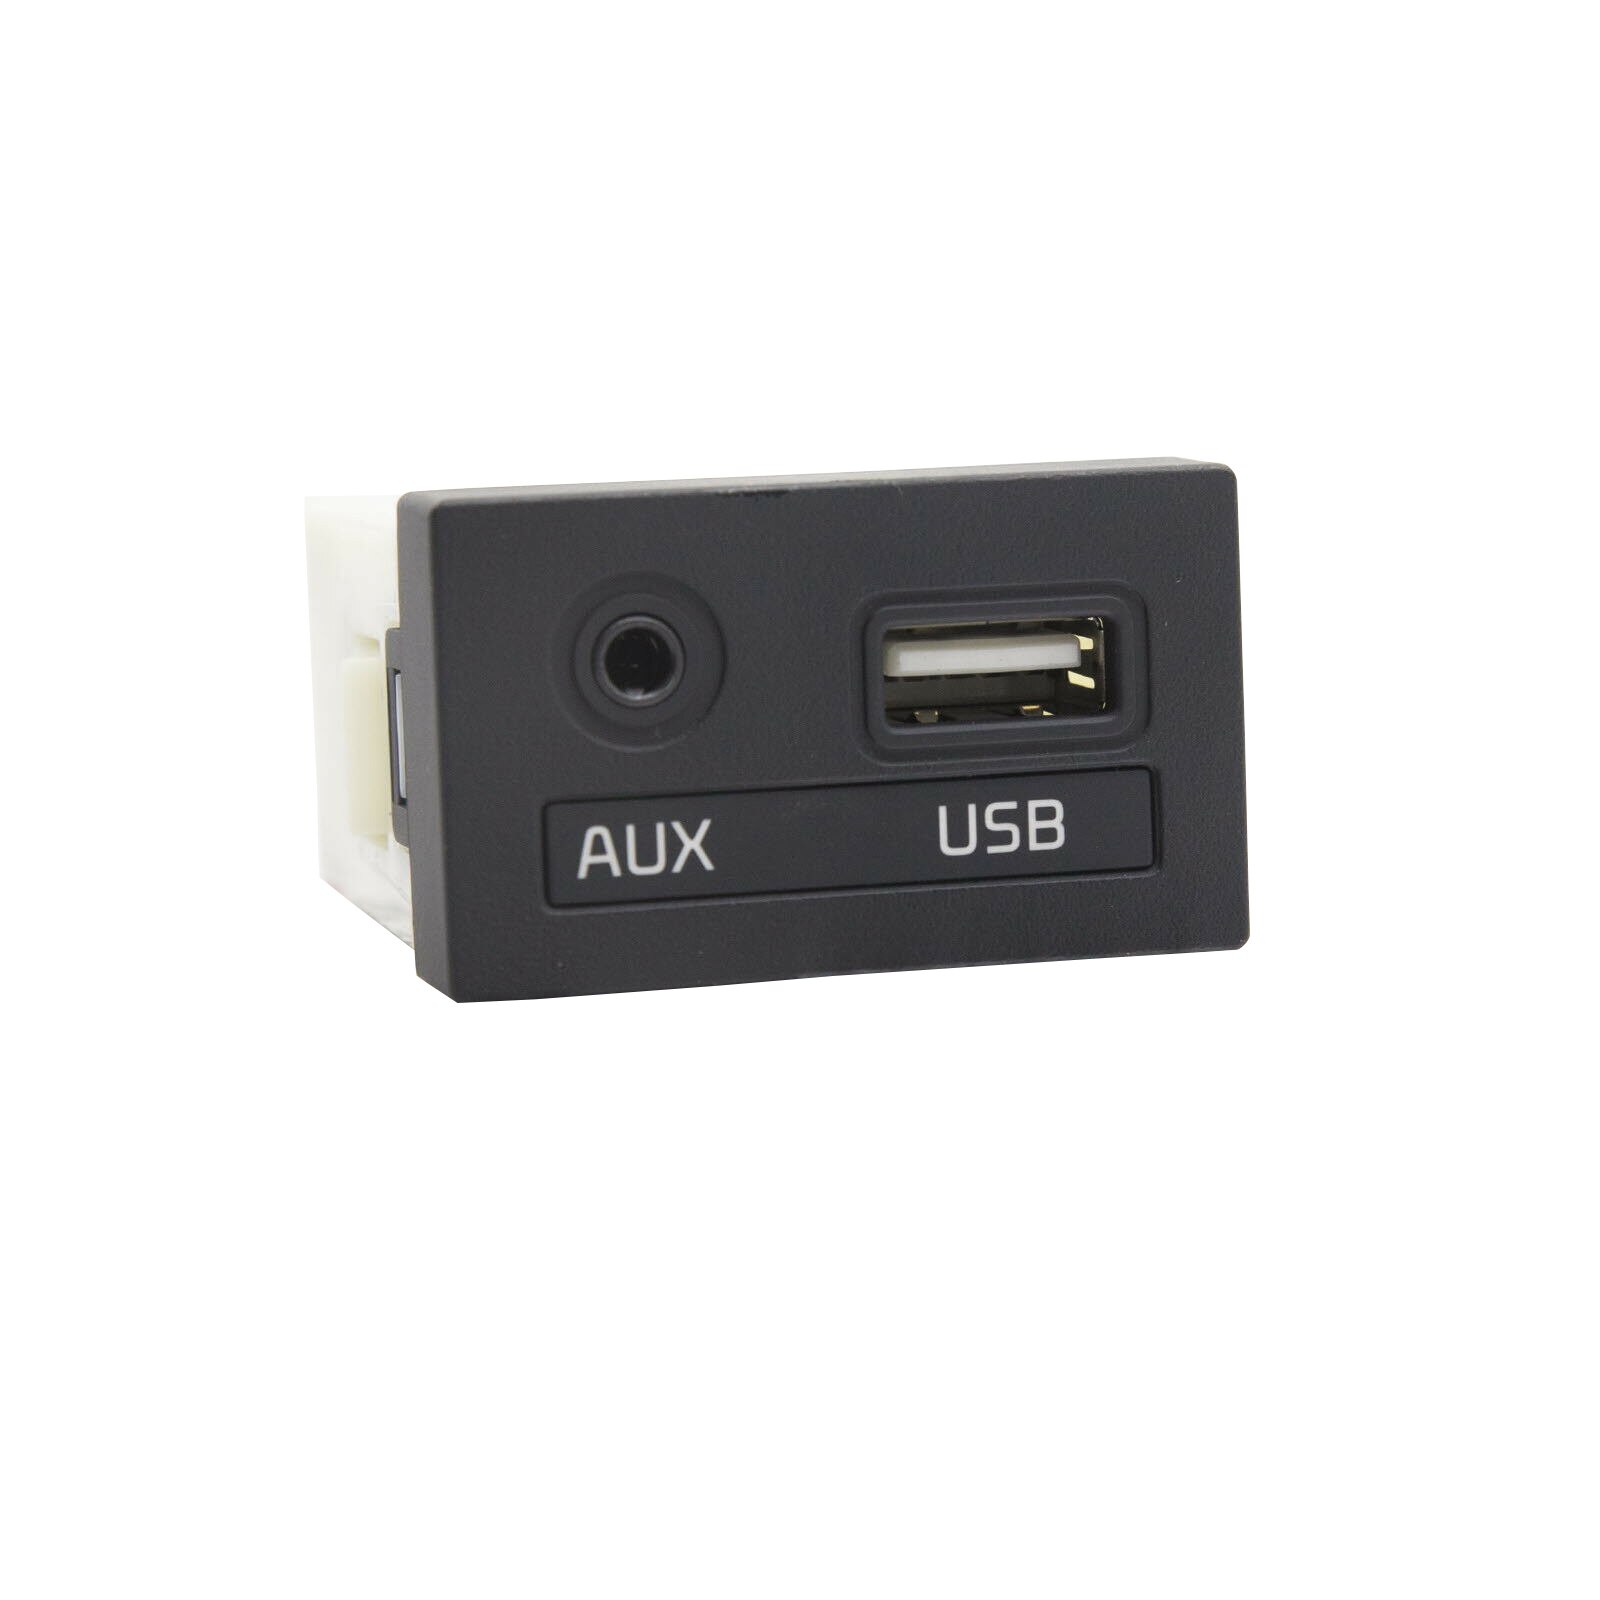 Oem 96120A7000 Aux Usb Jack Assy Voor Kia Forte Cerato K3 96120A7000 96120 A7000